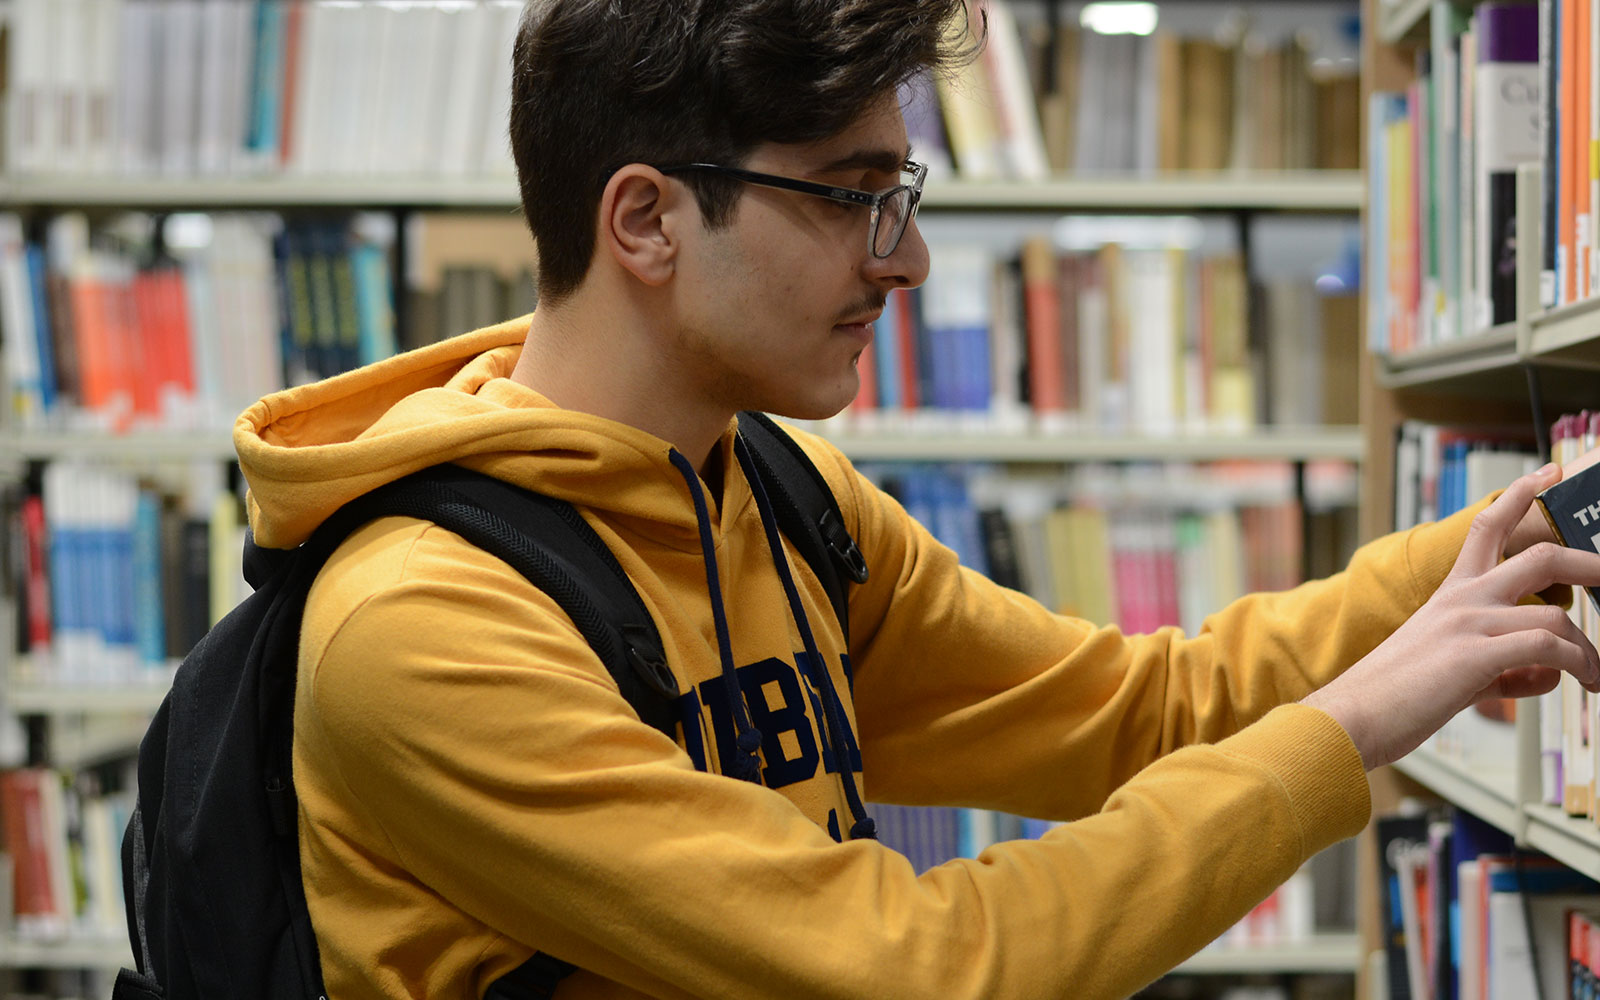 Student searching for books in a library